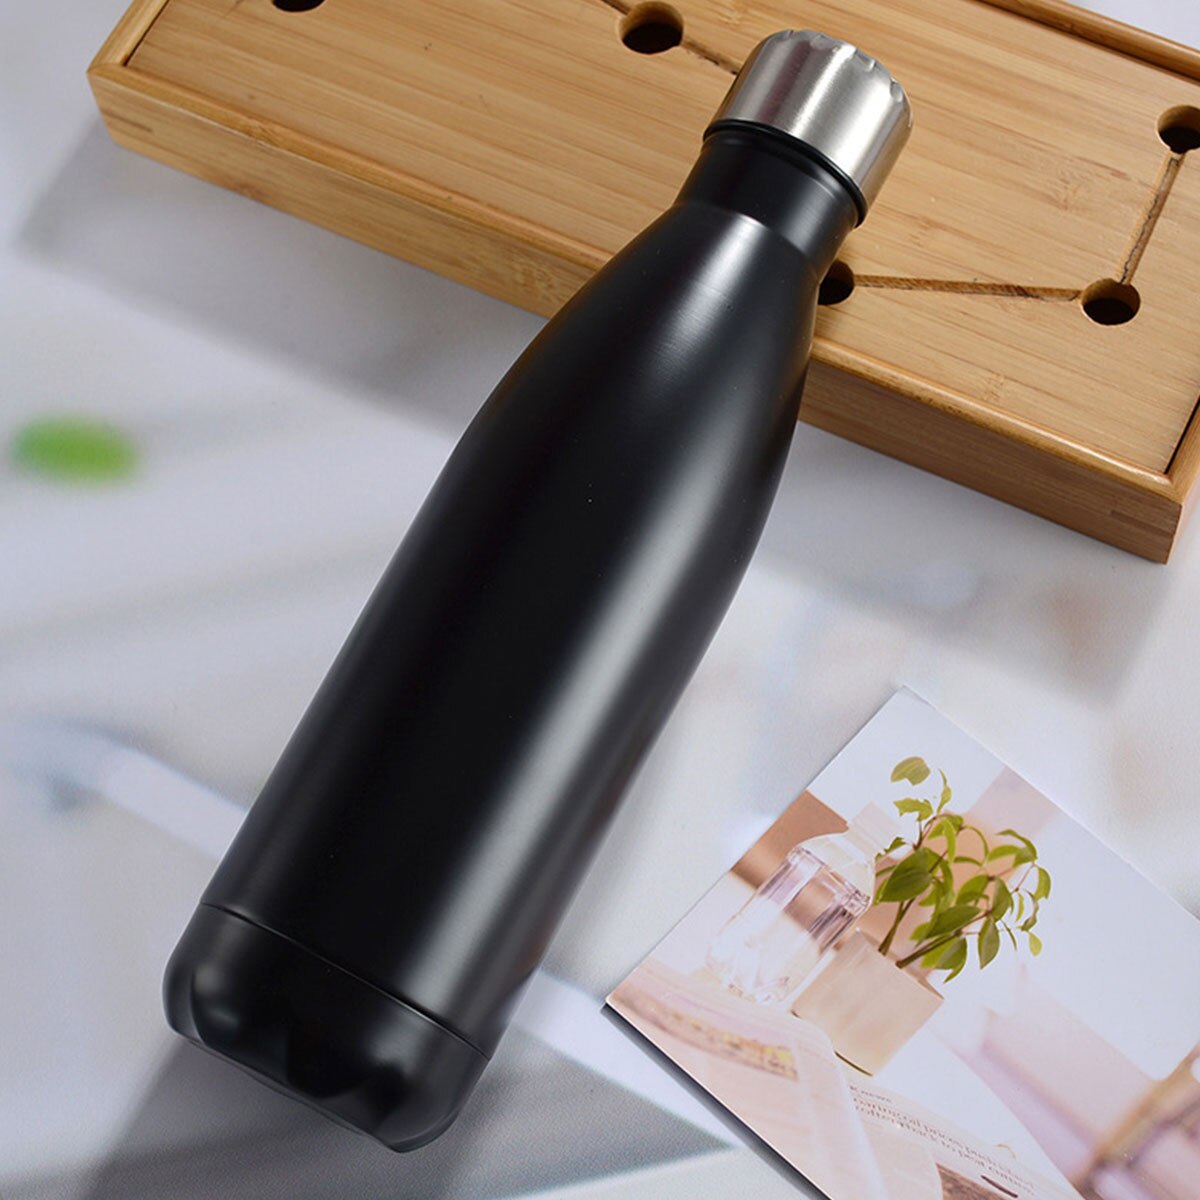 500ml Stainless Steel Water Bottles Double Deck BPA-Free 17 Oz Insulated Portable Sport Vacuum Thermos for Gym Camping Travel